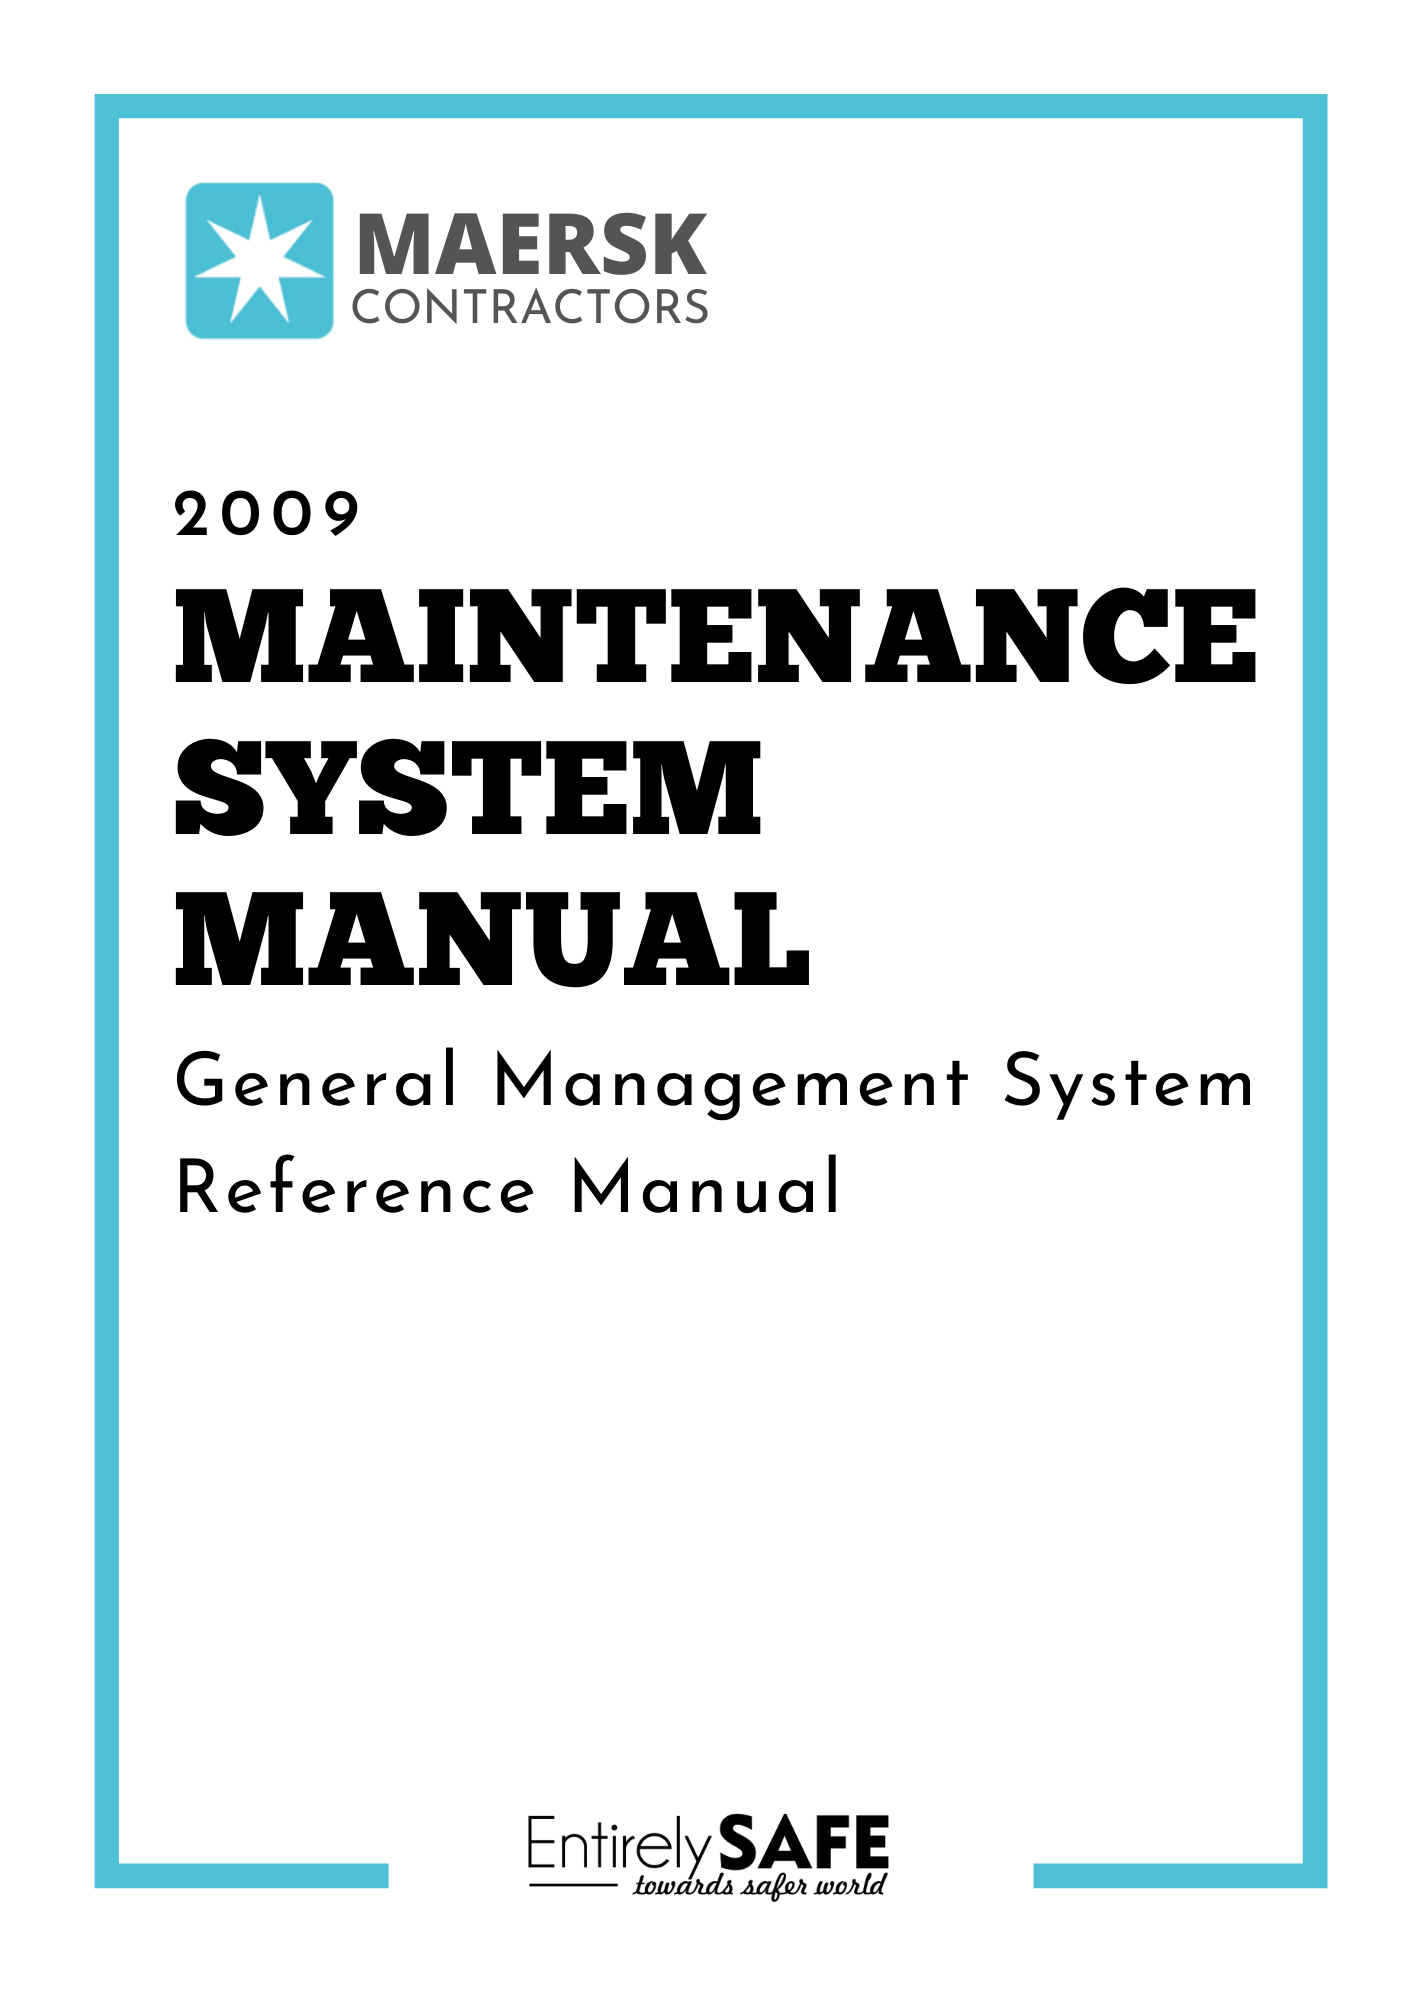 #143-FREE-Download-Maintenance-System-Manual-Maersk-Contractors